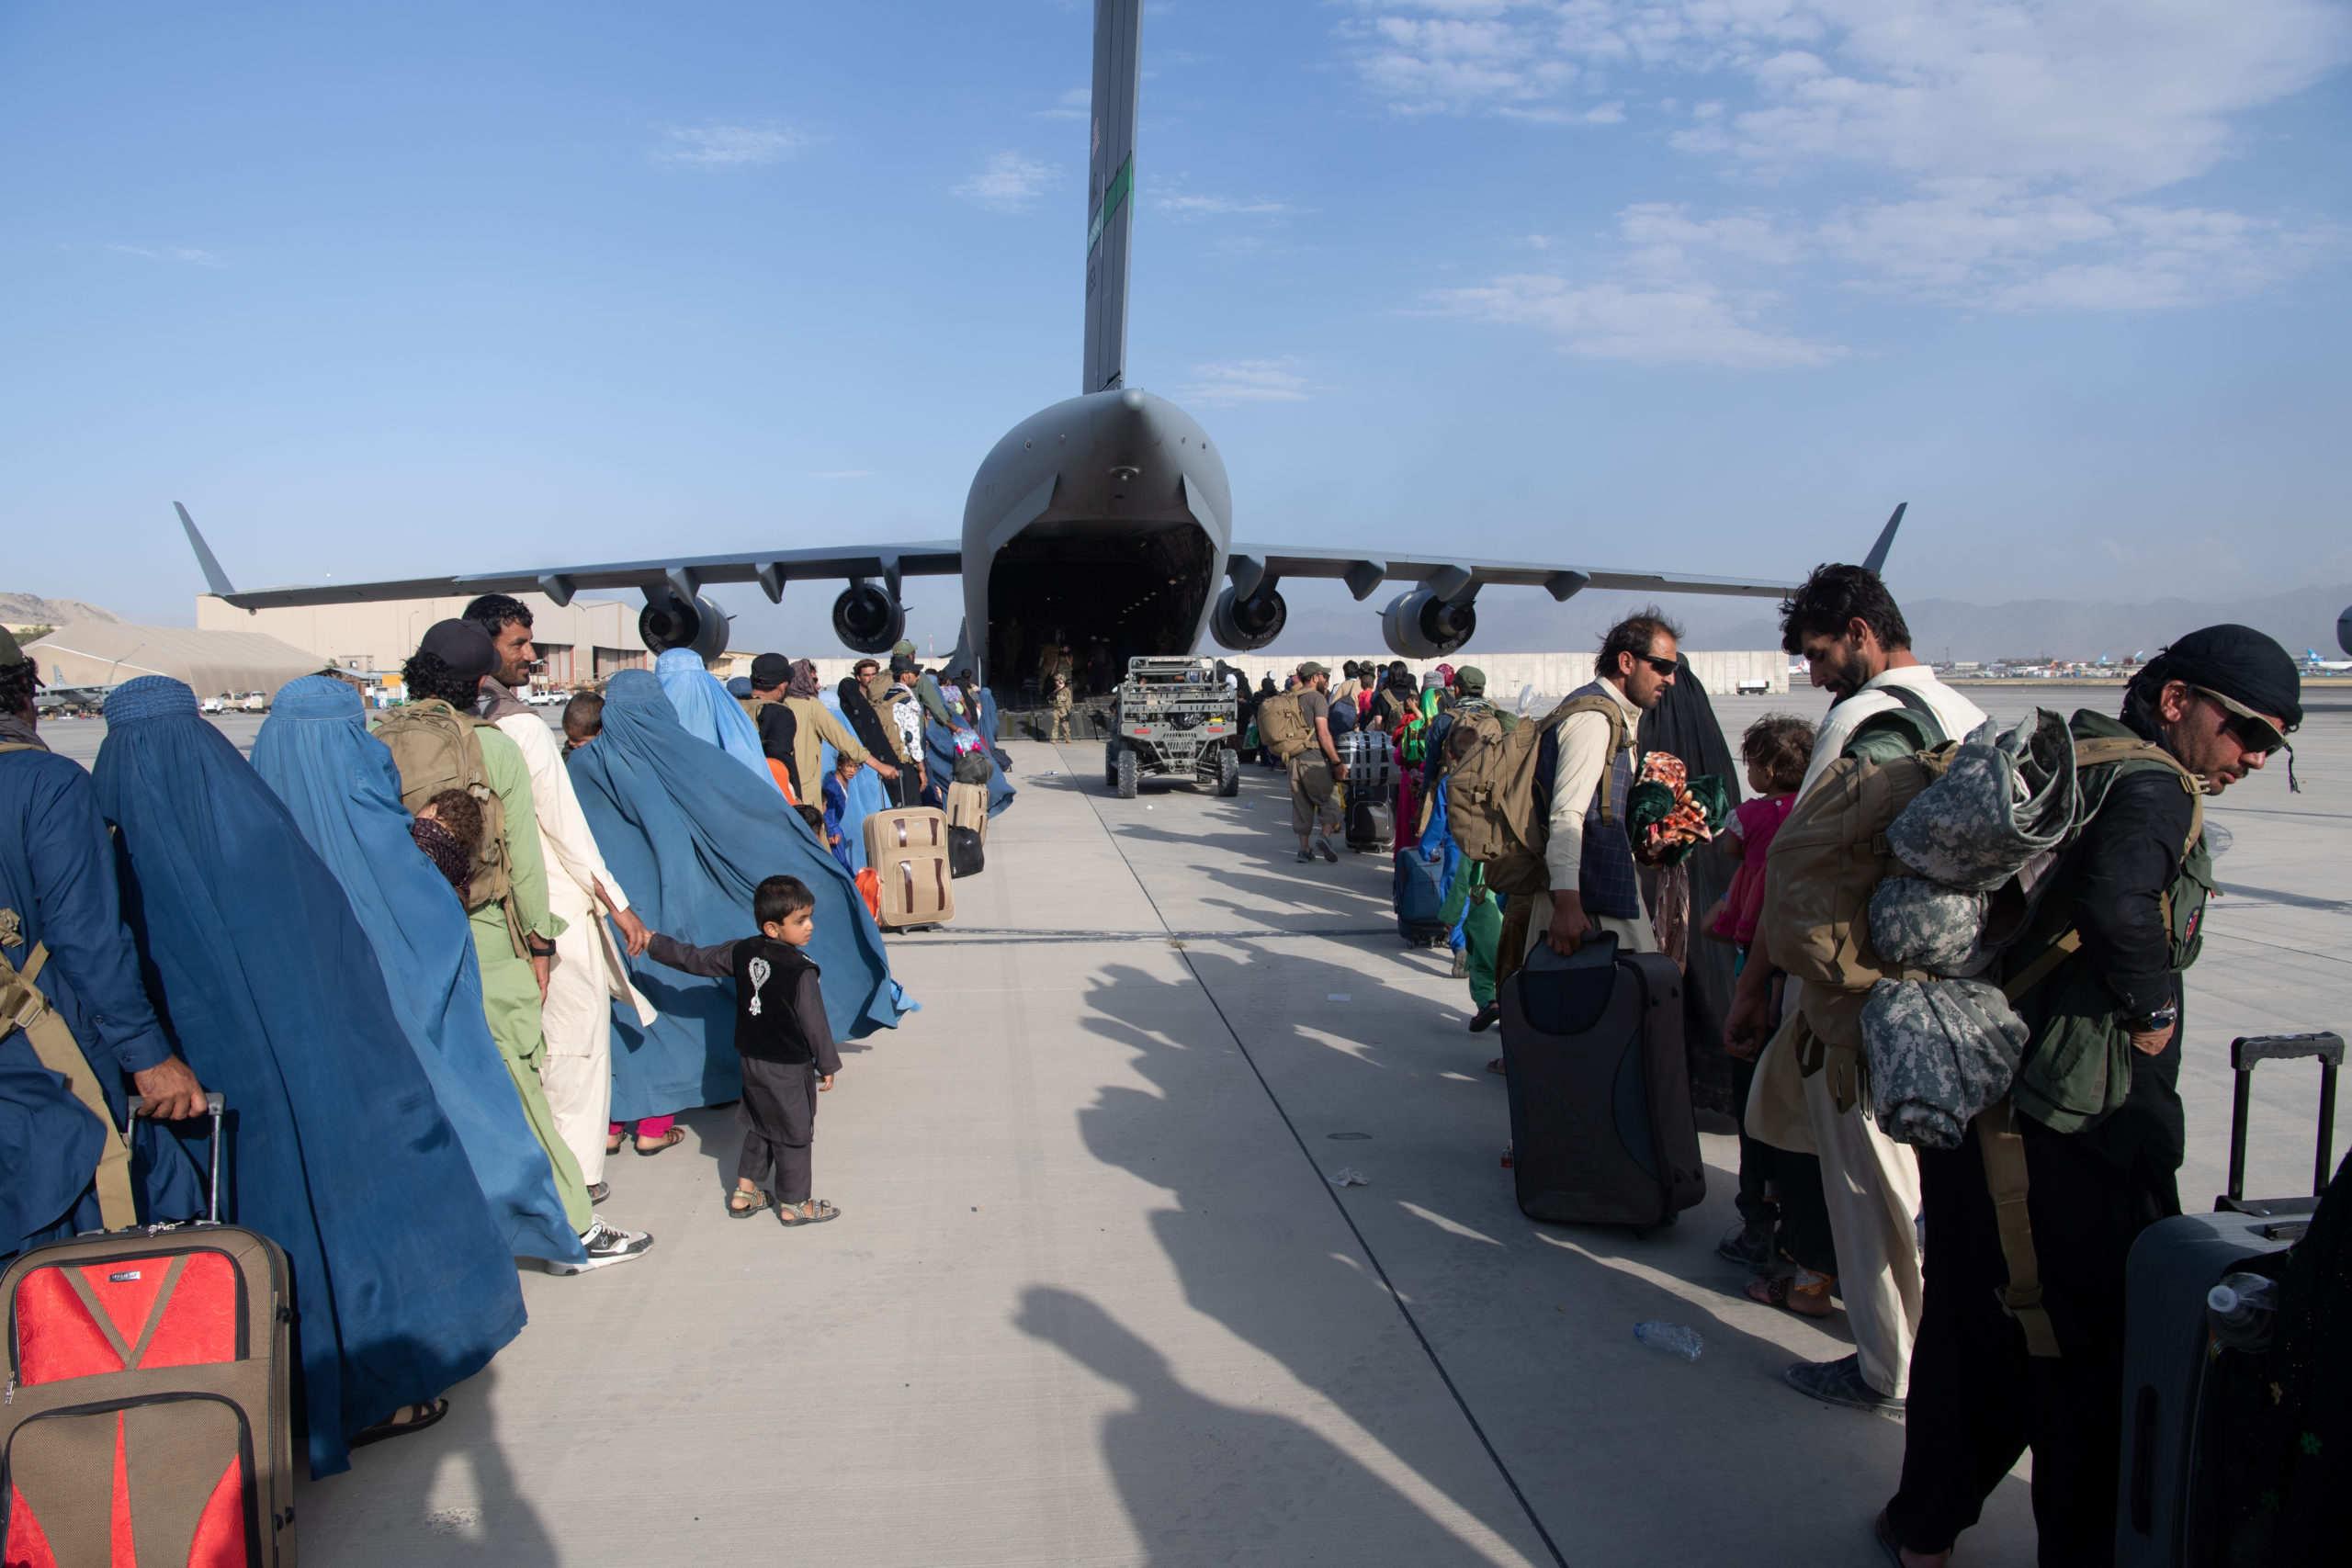 KABUL, AFGHANISTAN - AUGUST 24: In this handout provided by U.S. Central Command Public Affairs, U.S. Air Force loadmasters and pilots assigned to the 816th Expeditionary Airlift Squadron, load passengers aboard a U.S. Air Force C-17 Globemaster III in support of the Afghanistan evacuation at Hamid Karzai International Airport (HKIA) on August 24, 2021 in Kabul, Afghanistan. The United States and allies urged Afghans to leave Kabul airport, citing the threat of terrorist attacks, as Western troops race to evacuate as many people as possible by August 31. (Photo by Master Sgt. Donald R. Allen/U.S. Air Forces Europe-Africa via Getty Images)